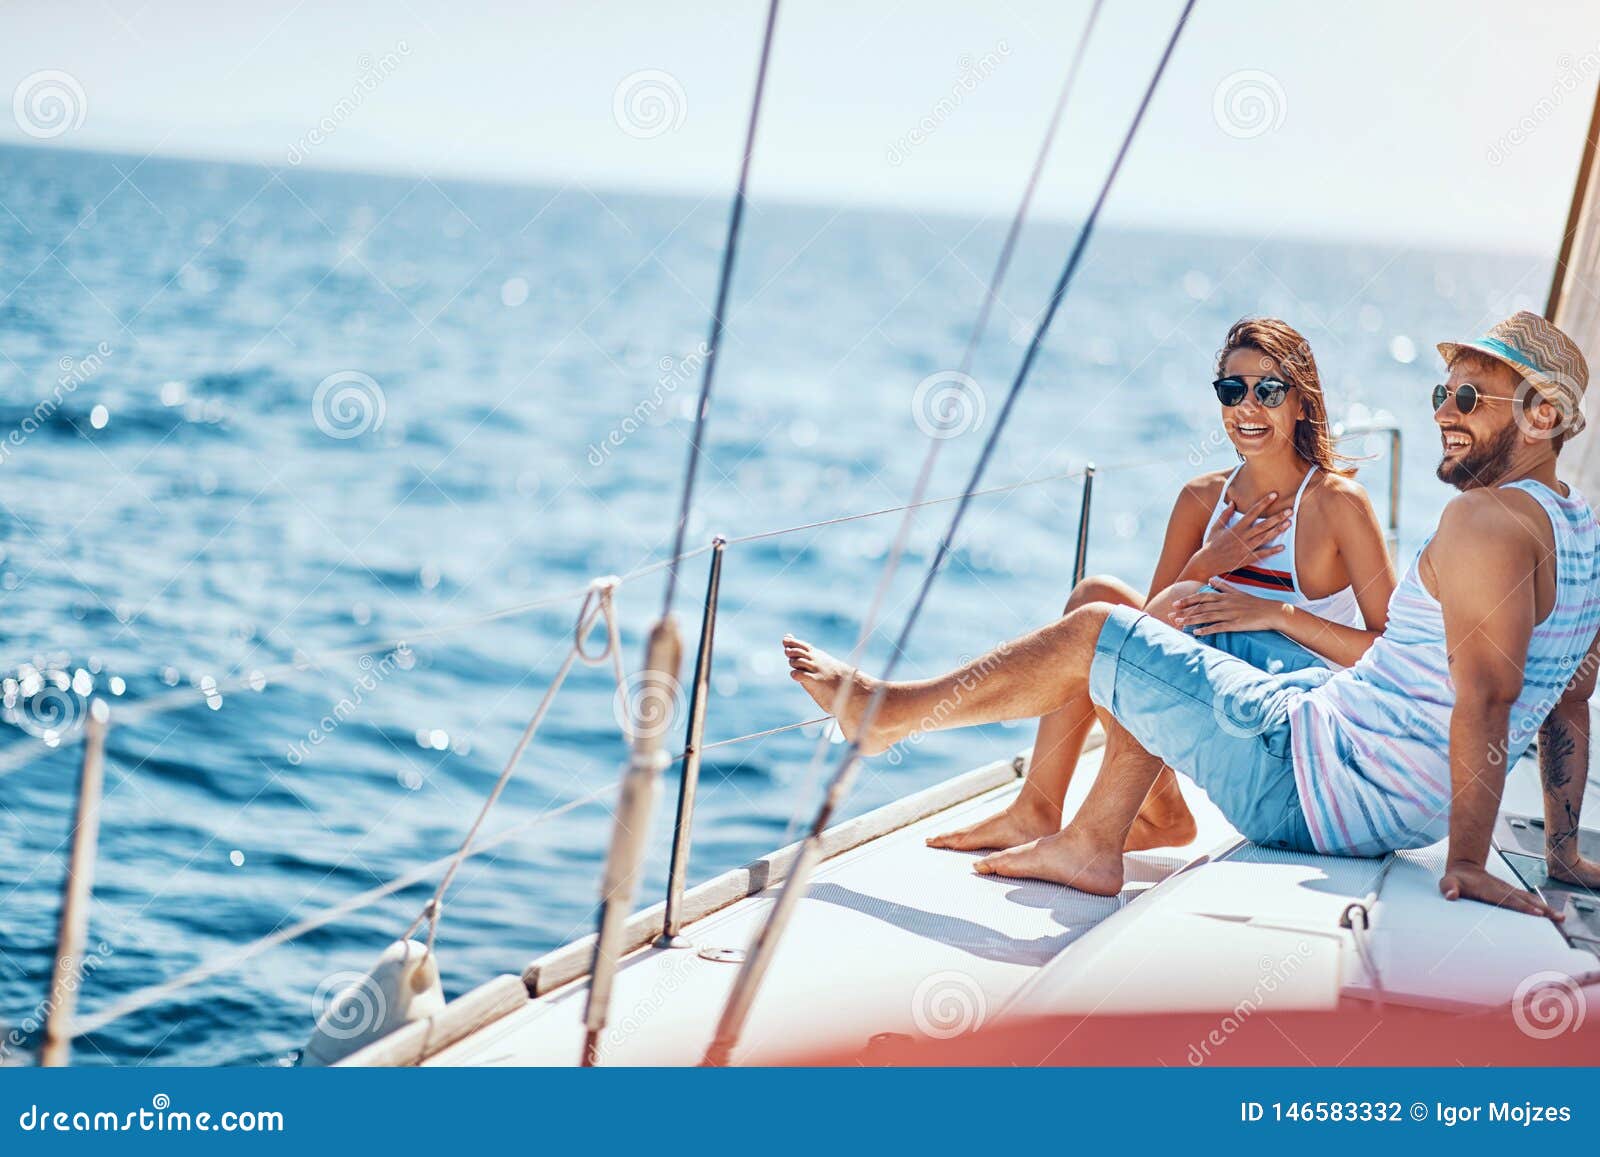 couple on yacht poster